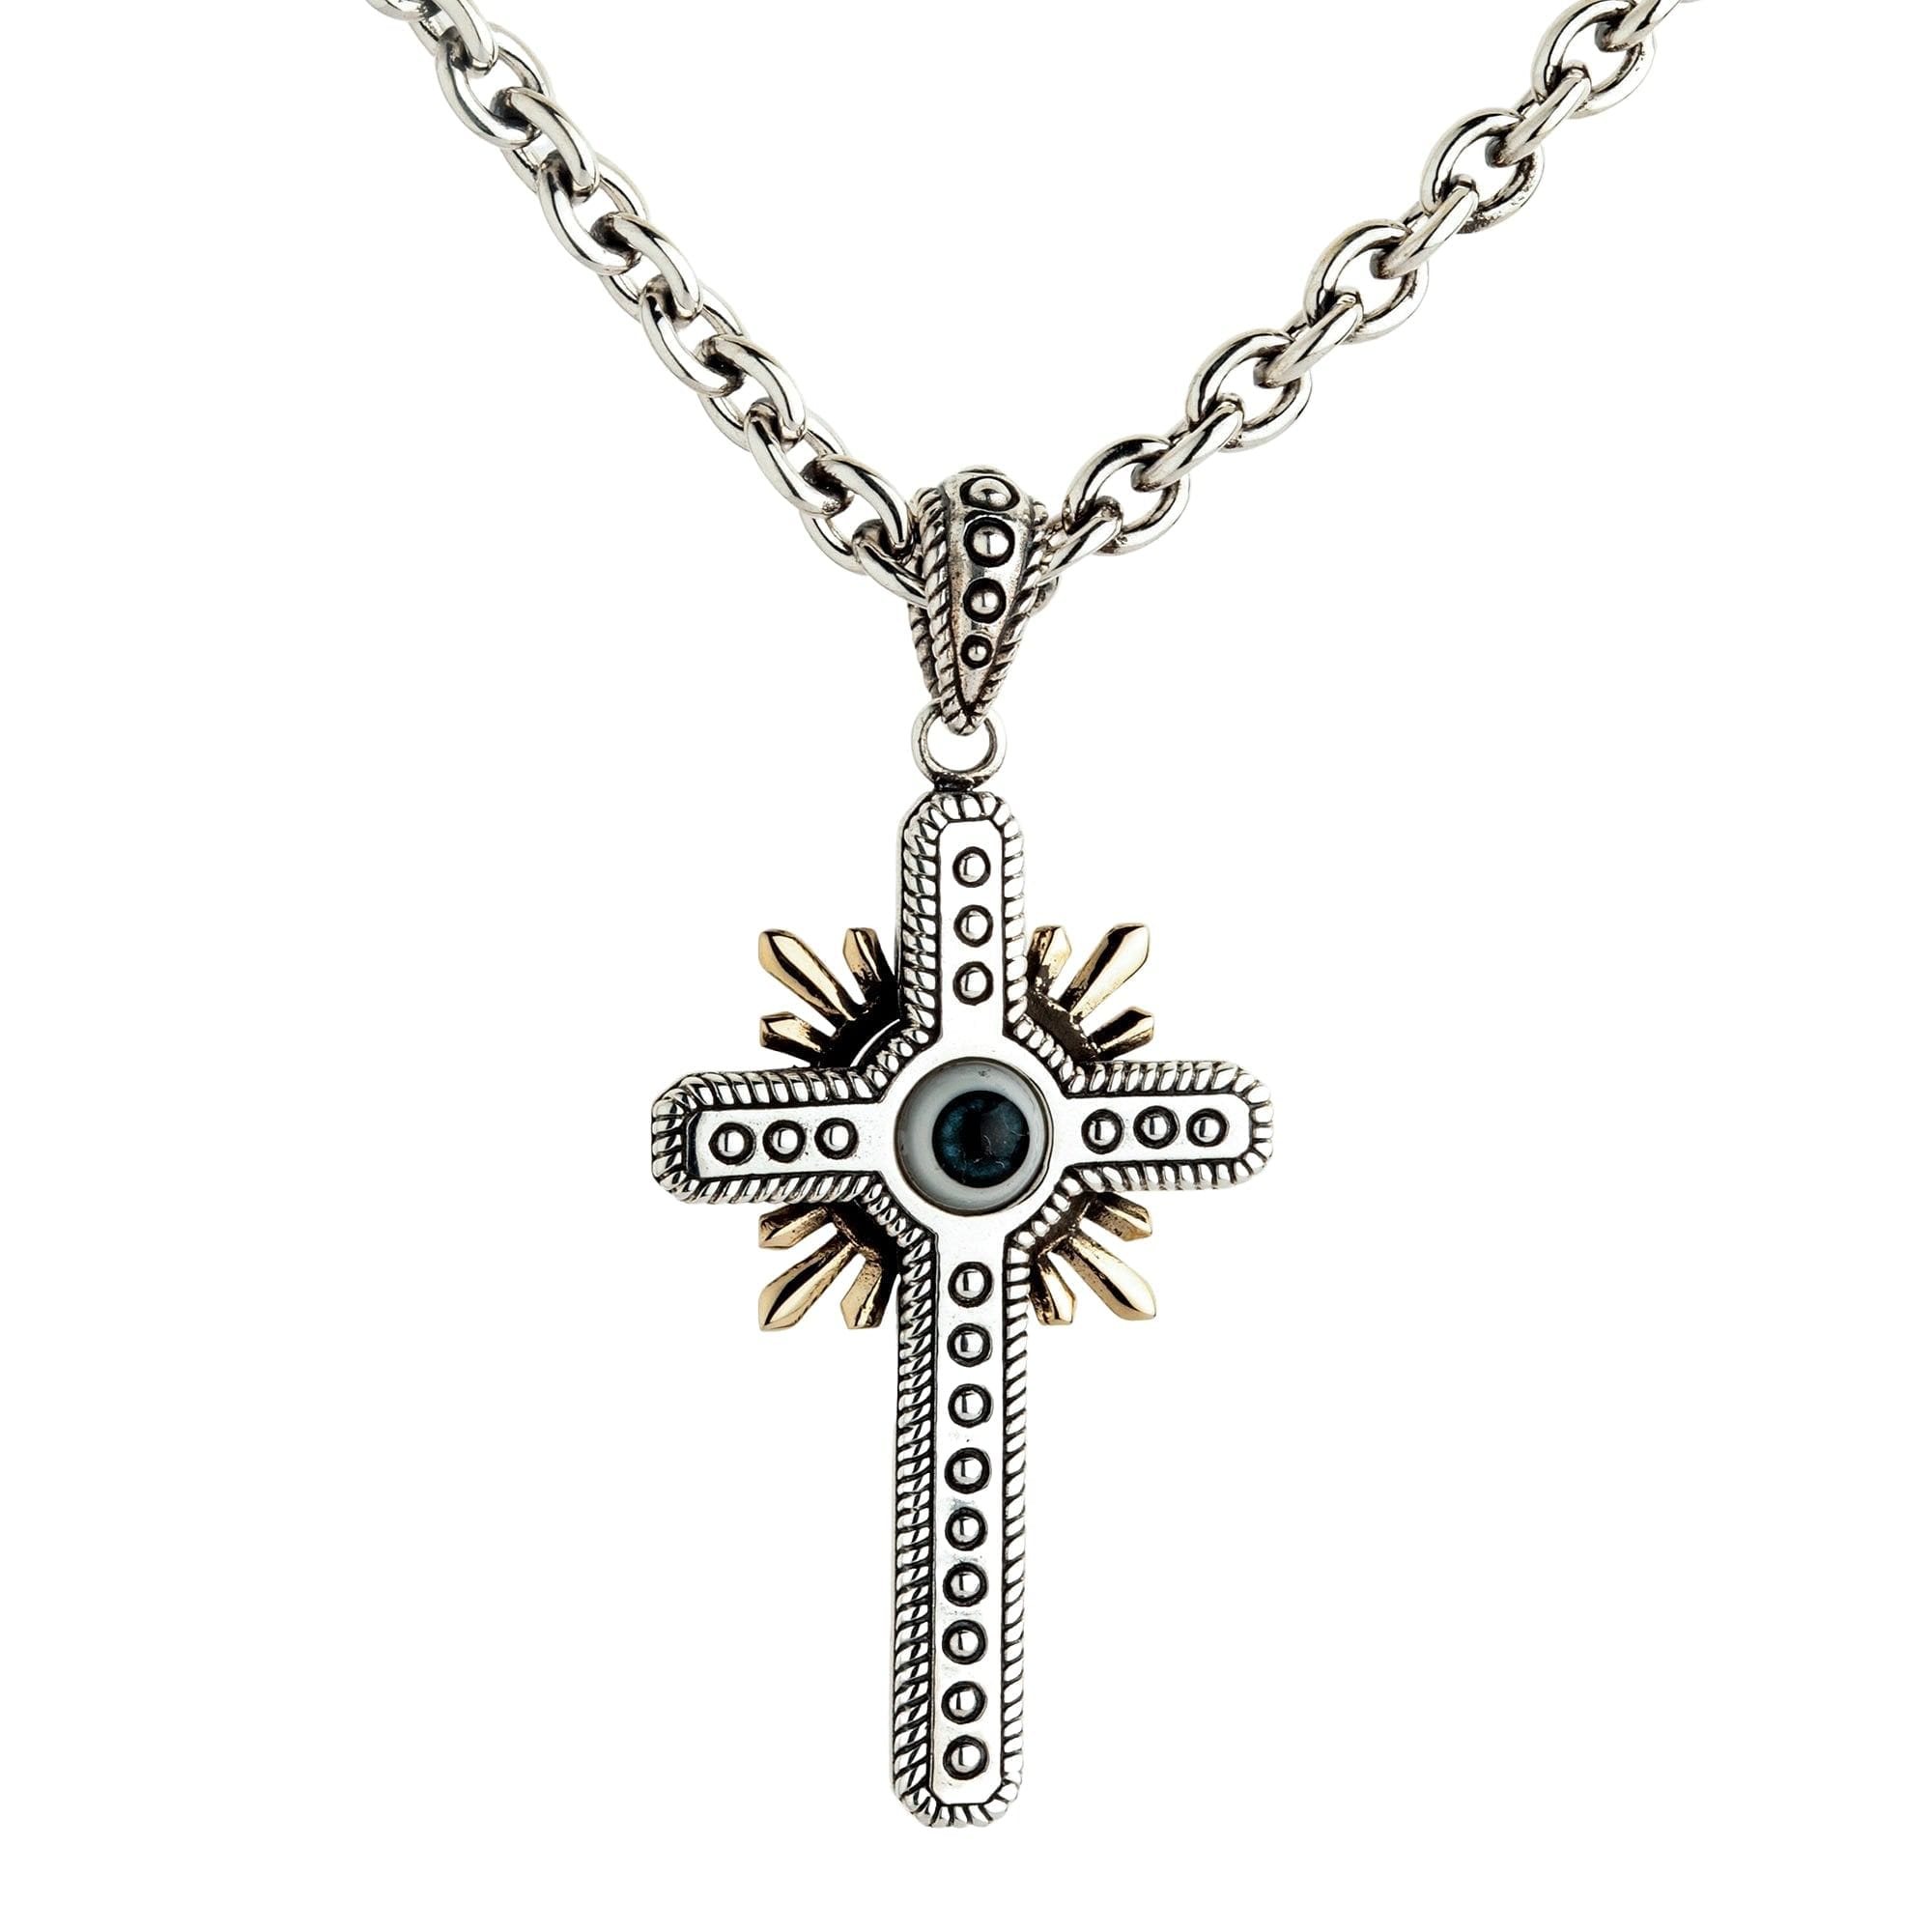 Syfer Holy Bible Nail Cross Pendant for Men and Women Black Silver  Stainless Steel Pendant Price in India - Buy Syfer Holy Bible Nail Cross  Pendant for Men and Women Black Silver